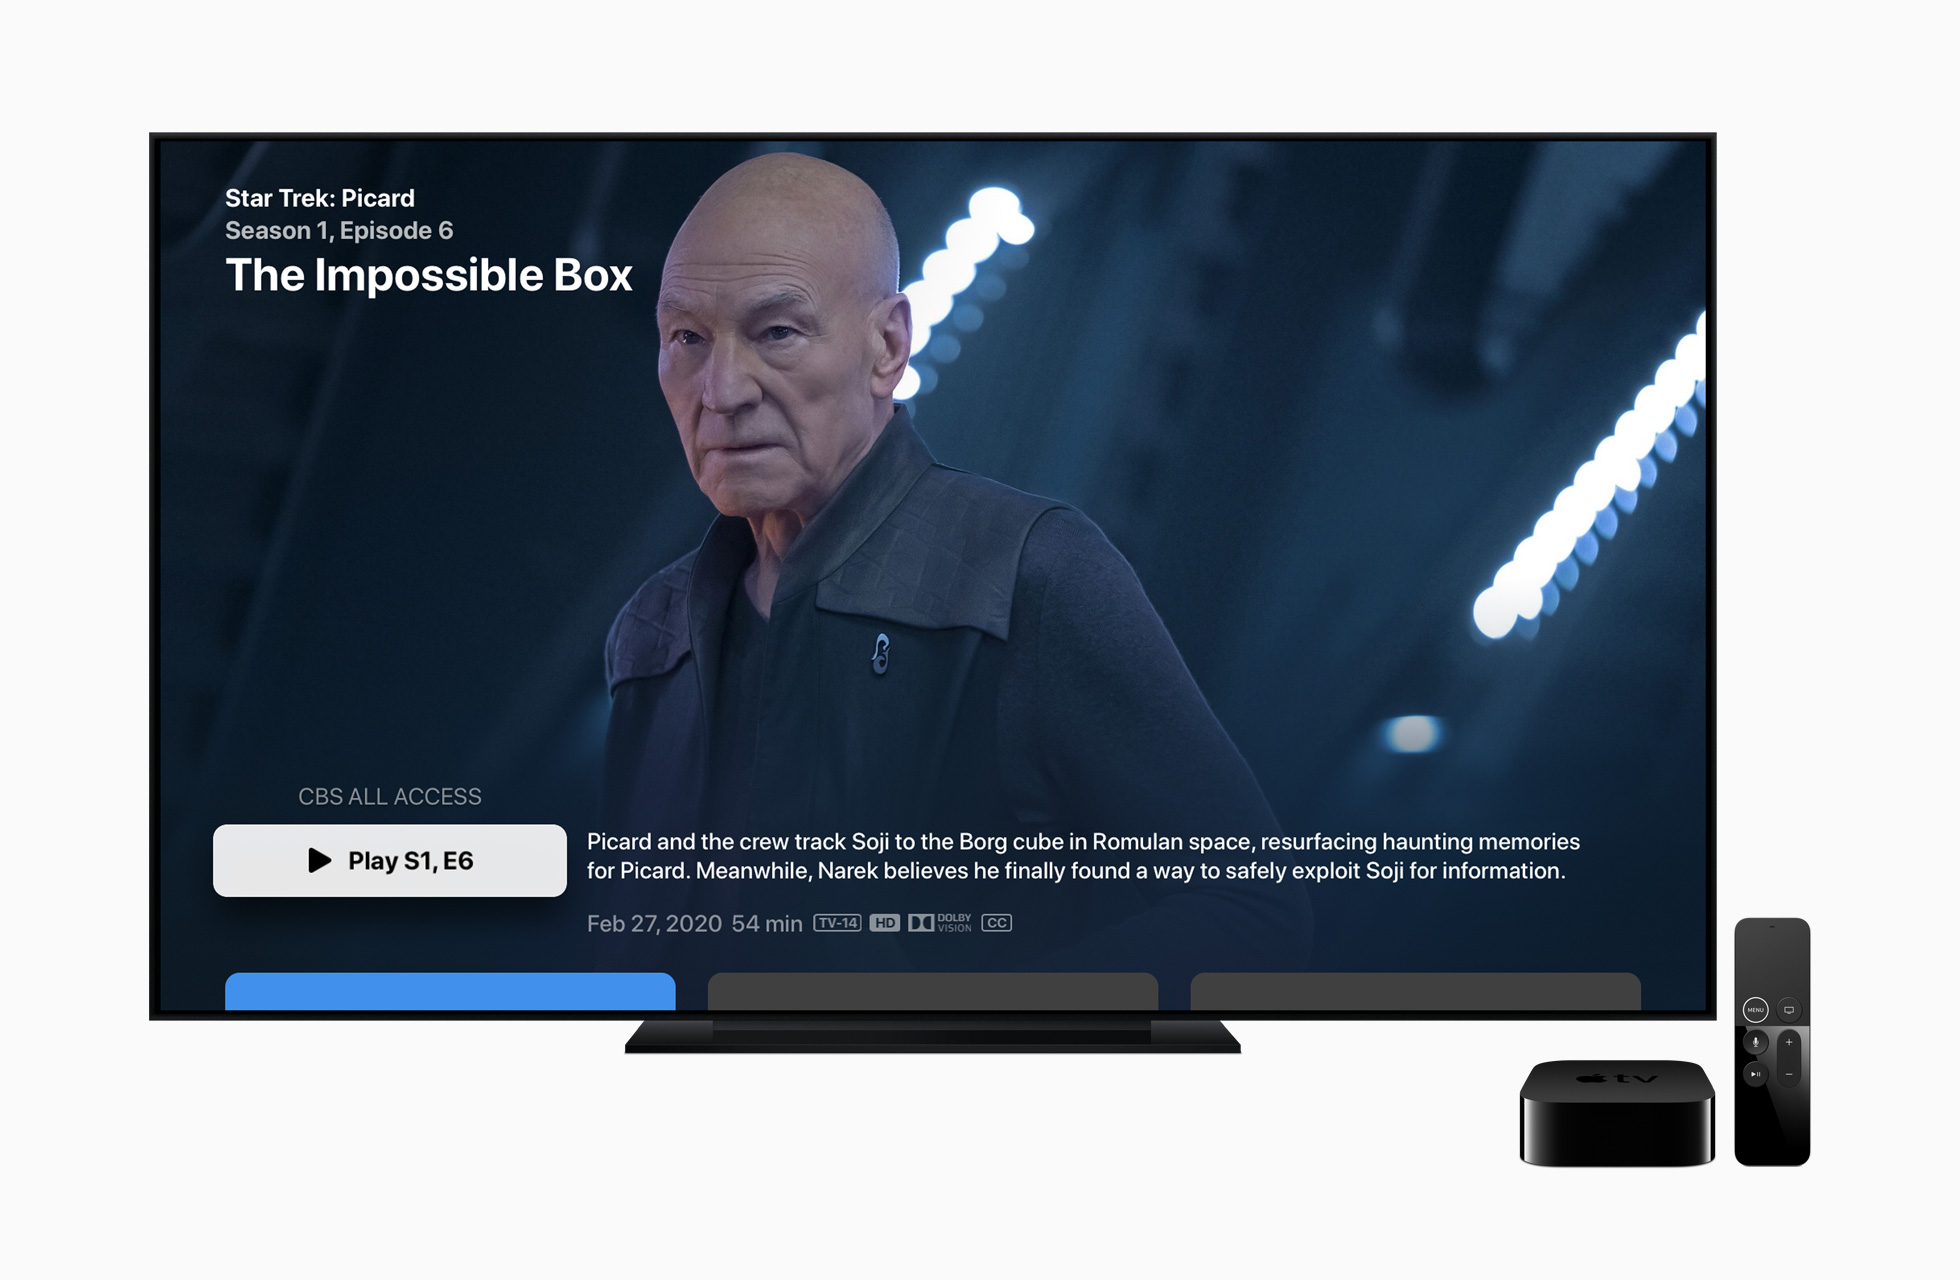 Apple TV+ subscribers get CBS All Access and SHOWTIME bundle at a great